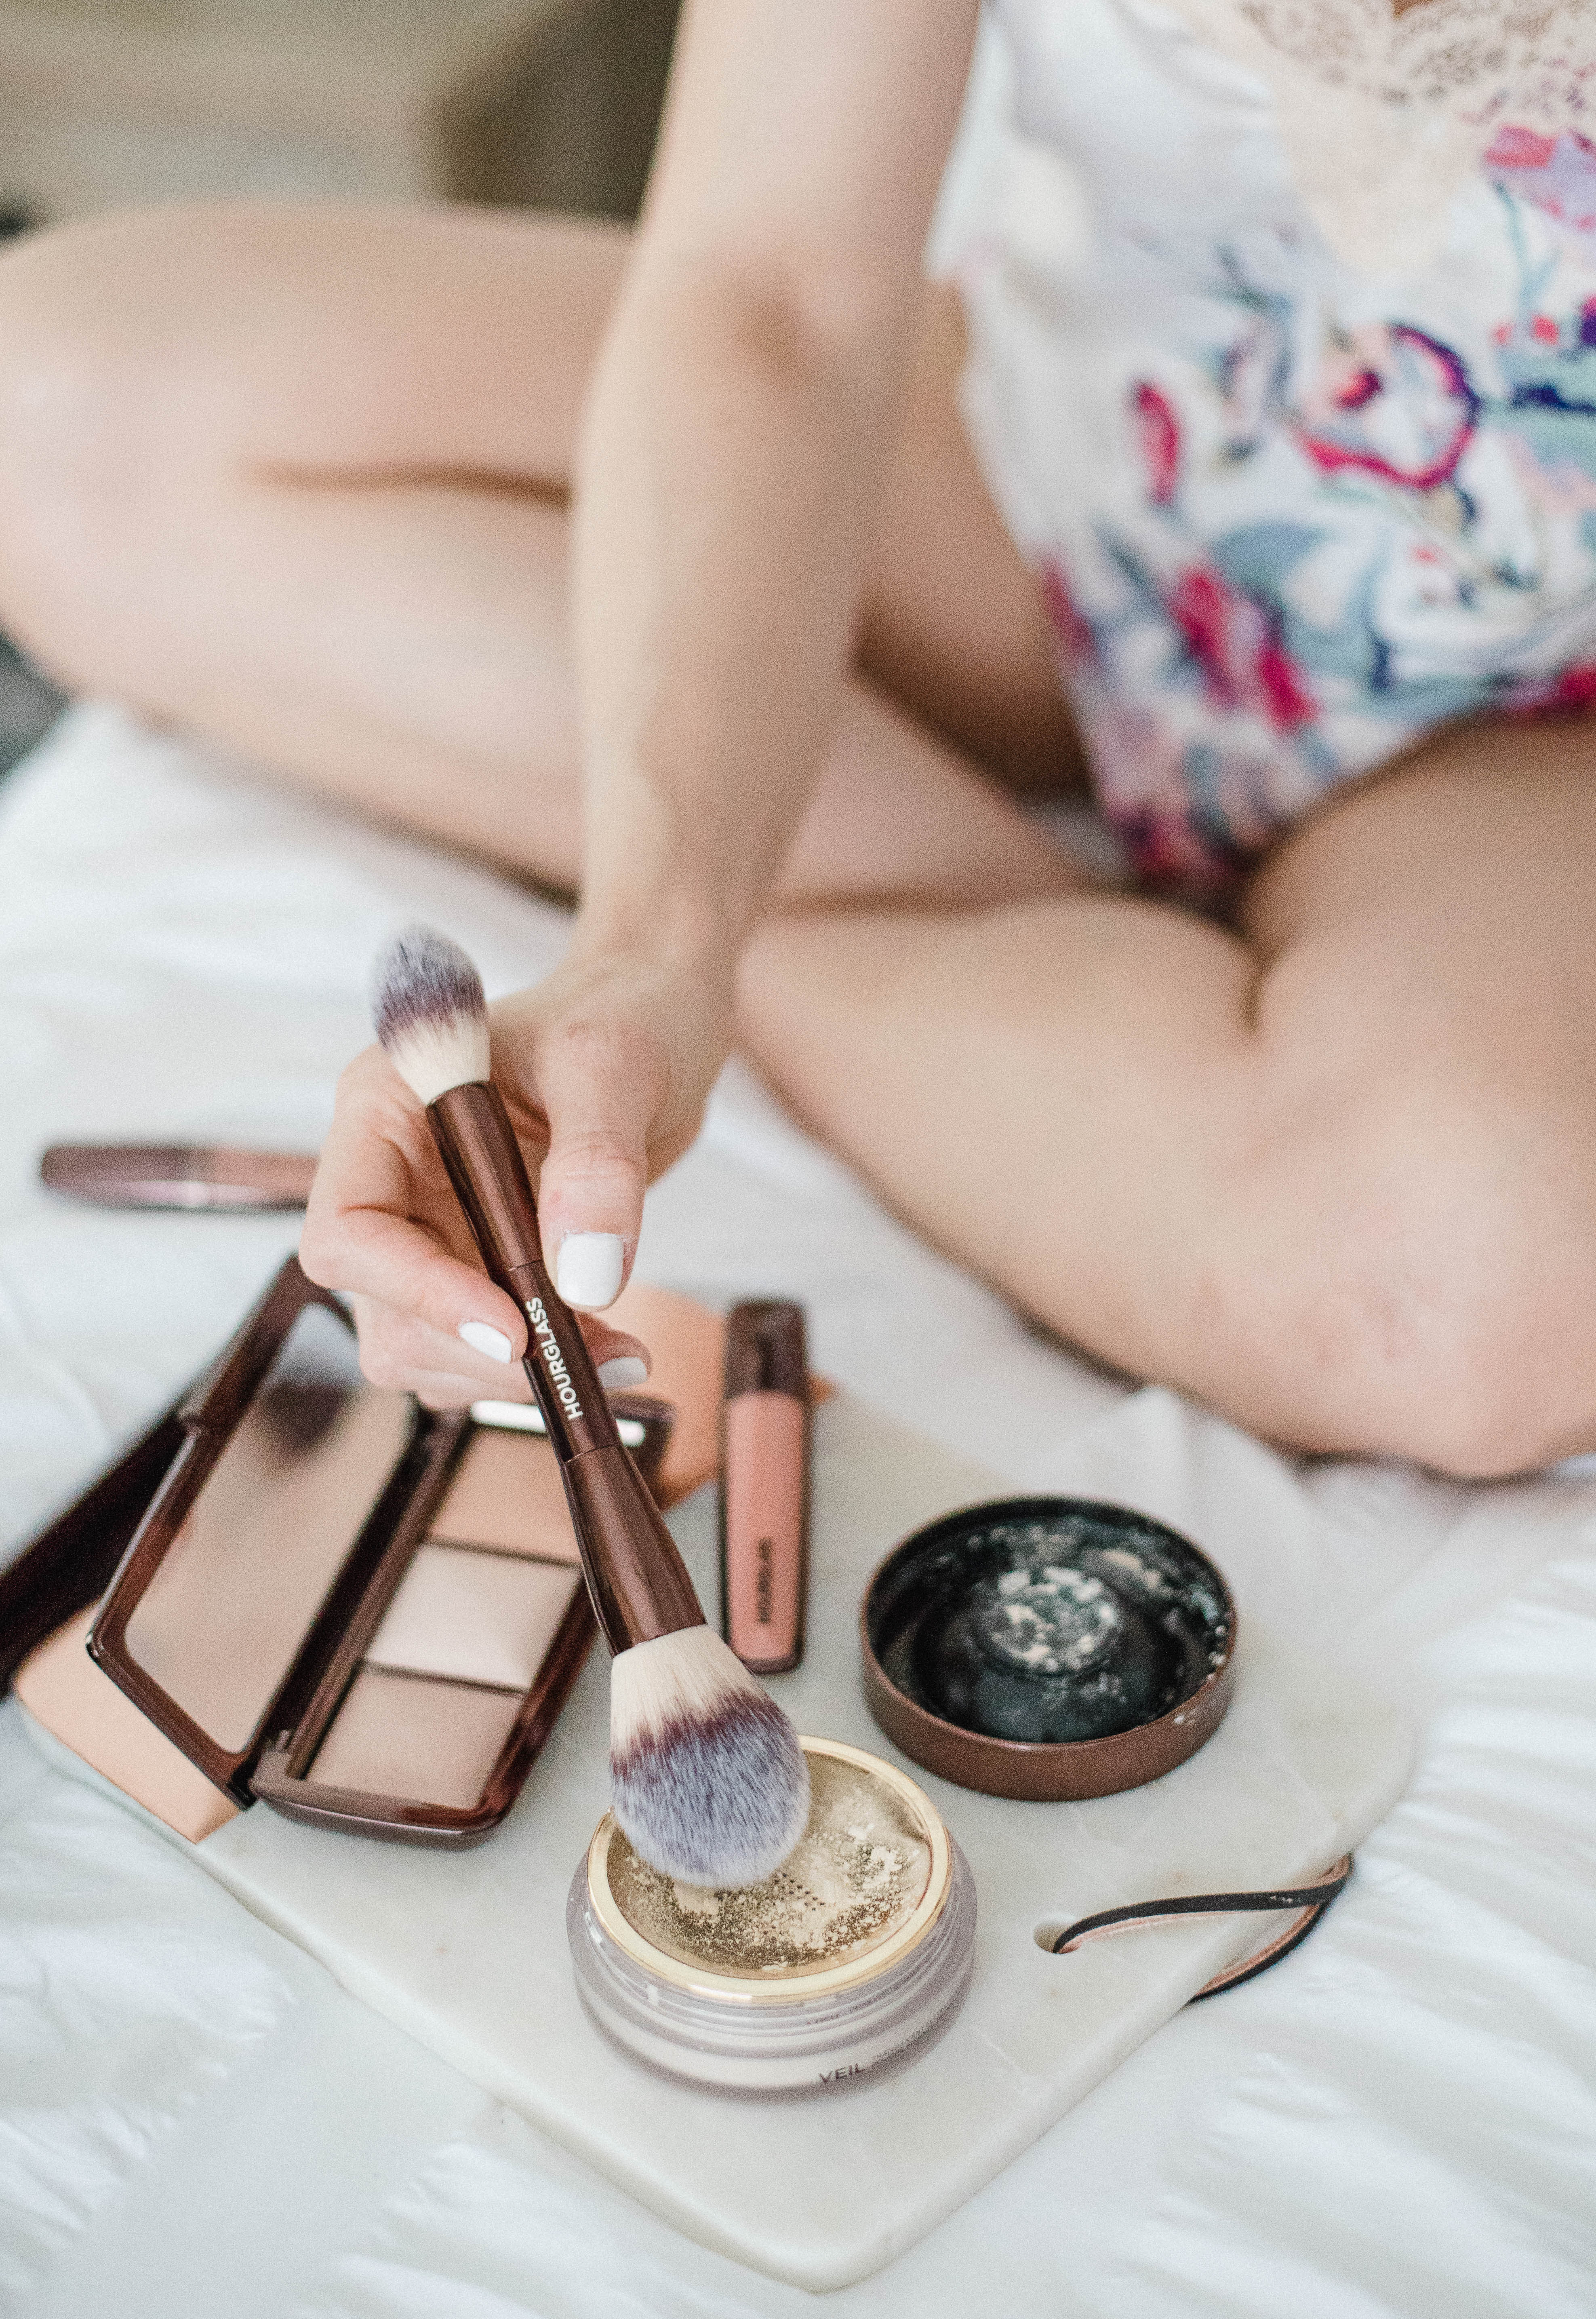 Life and style blogger Lauren McBride shares a simple natural, glowing makeup look featuring a variety of products from Hourglass Cosmetics. 